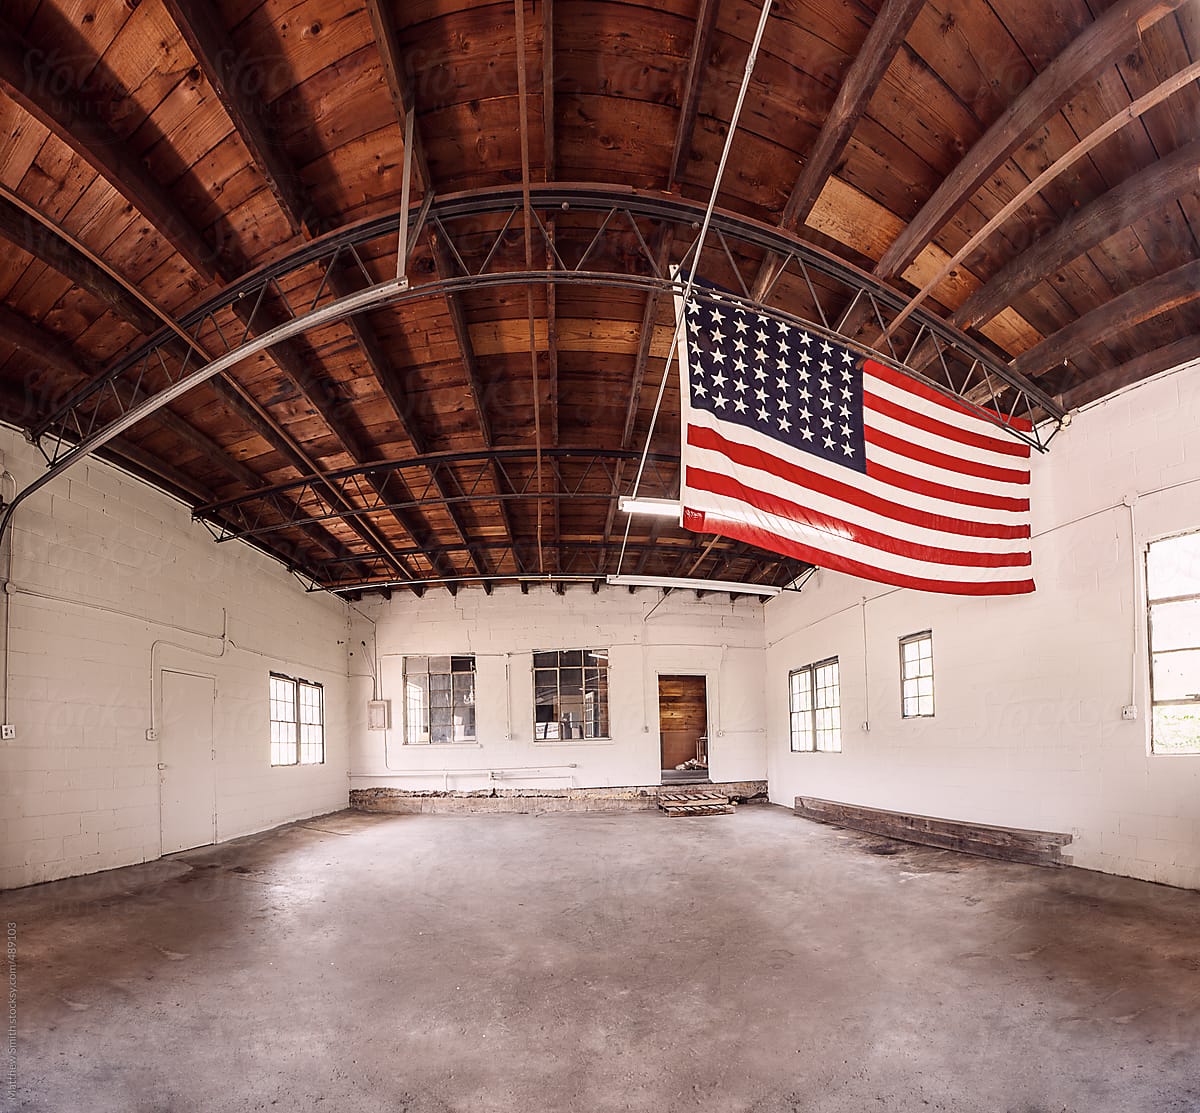 An Empty Building With An American Flag Hanging From The Ceiling.